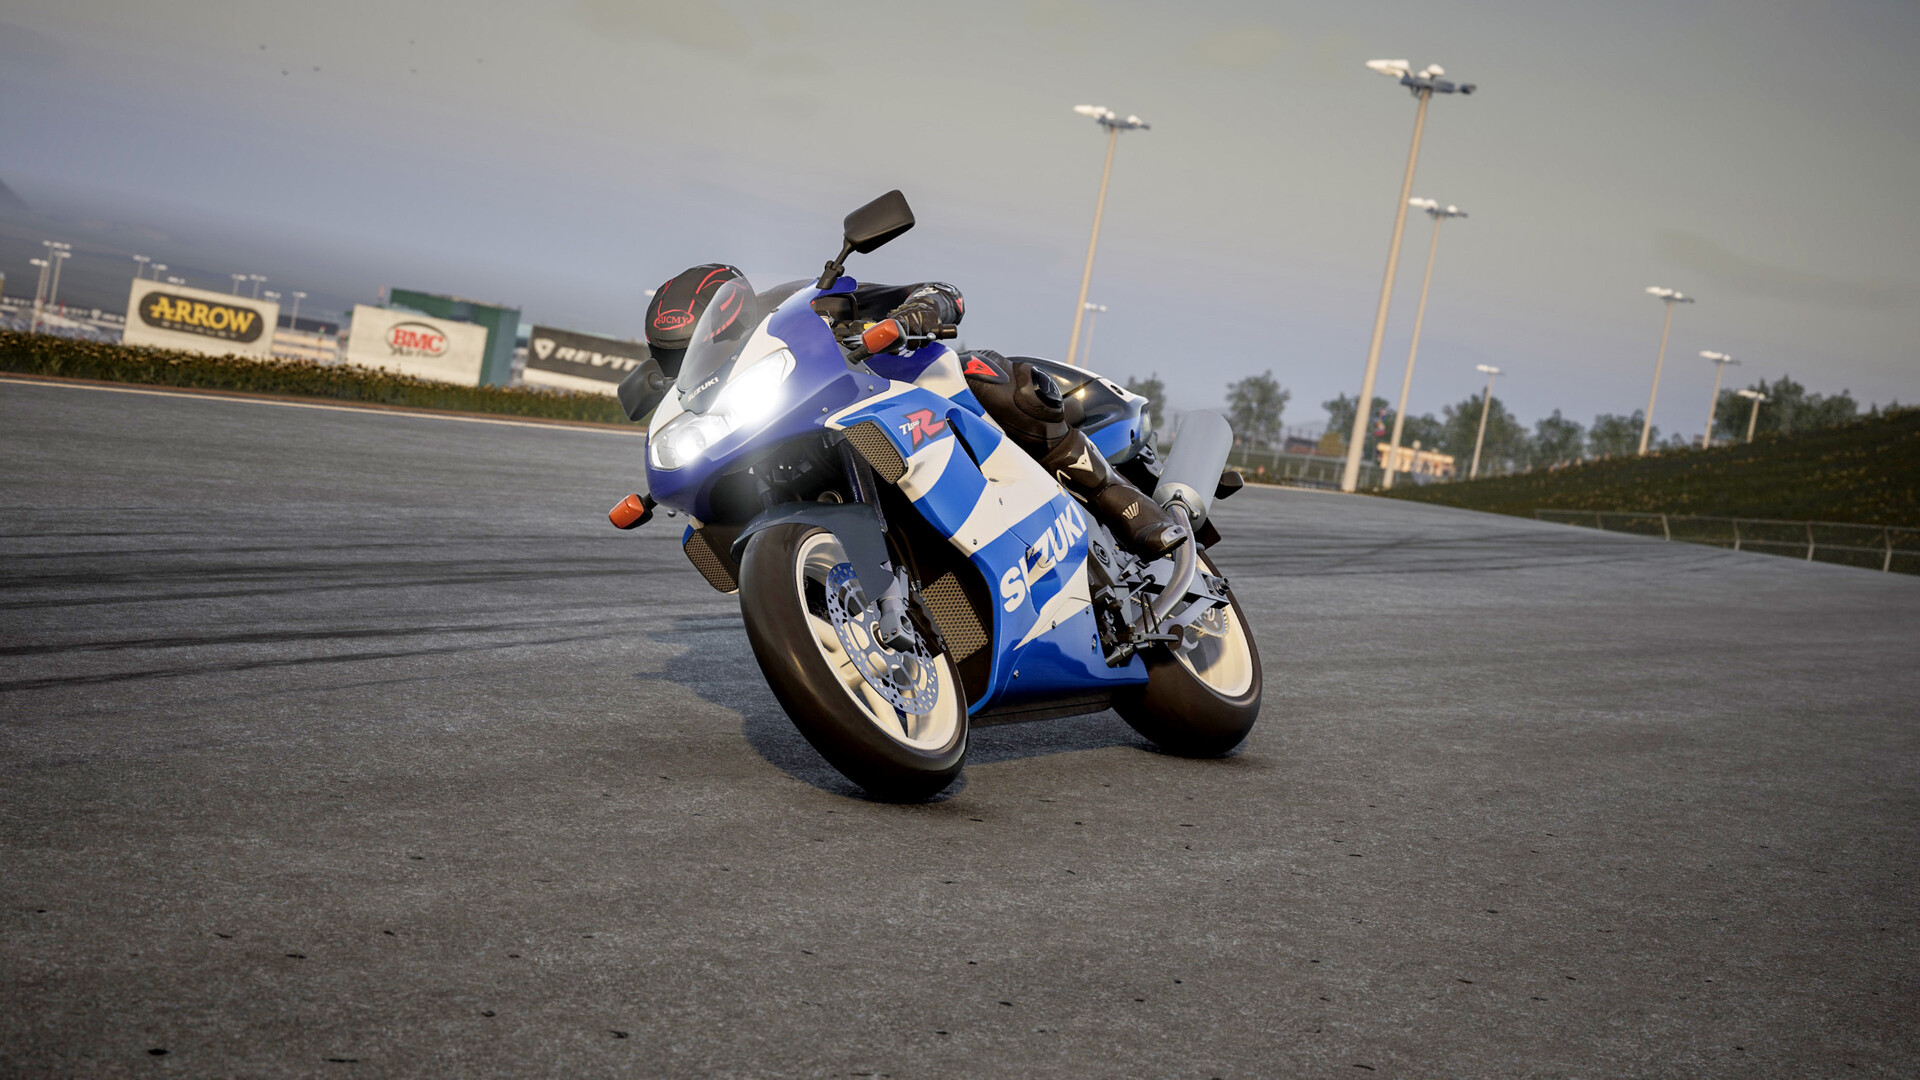 Ride 5 will have new gameplay and Career Mode